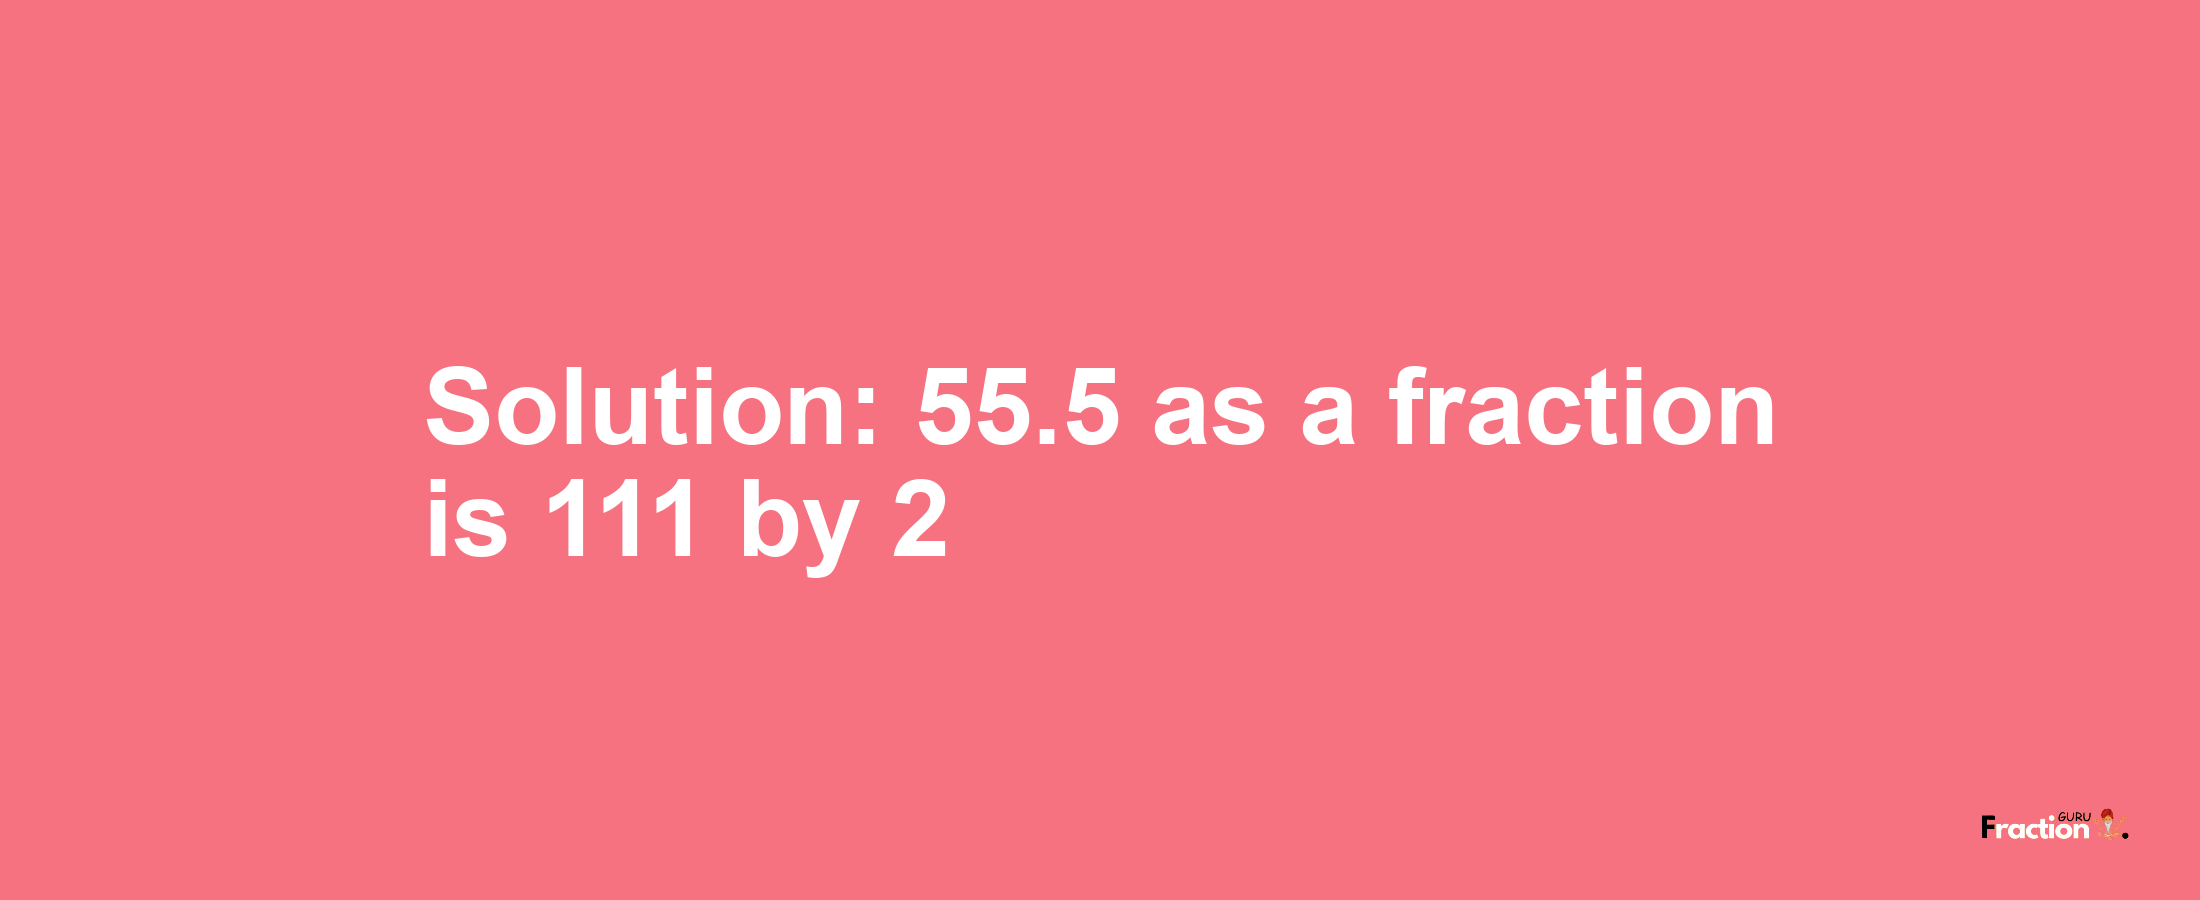 Solution:55.5 as a fraction is 111/2